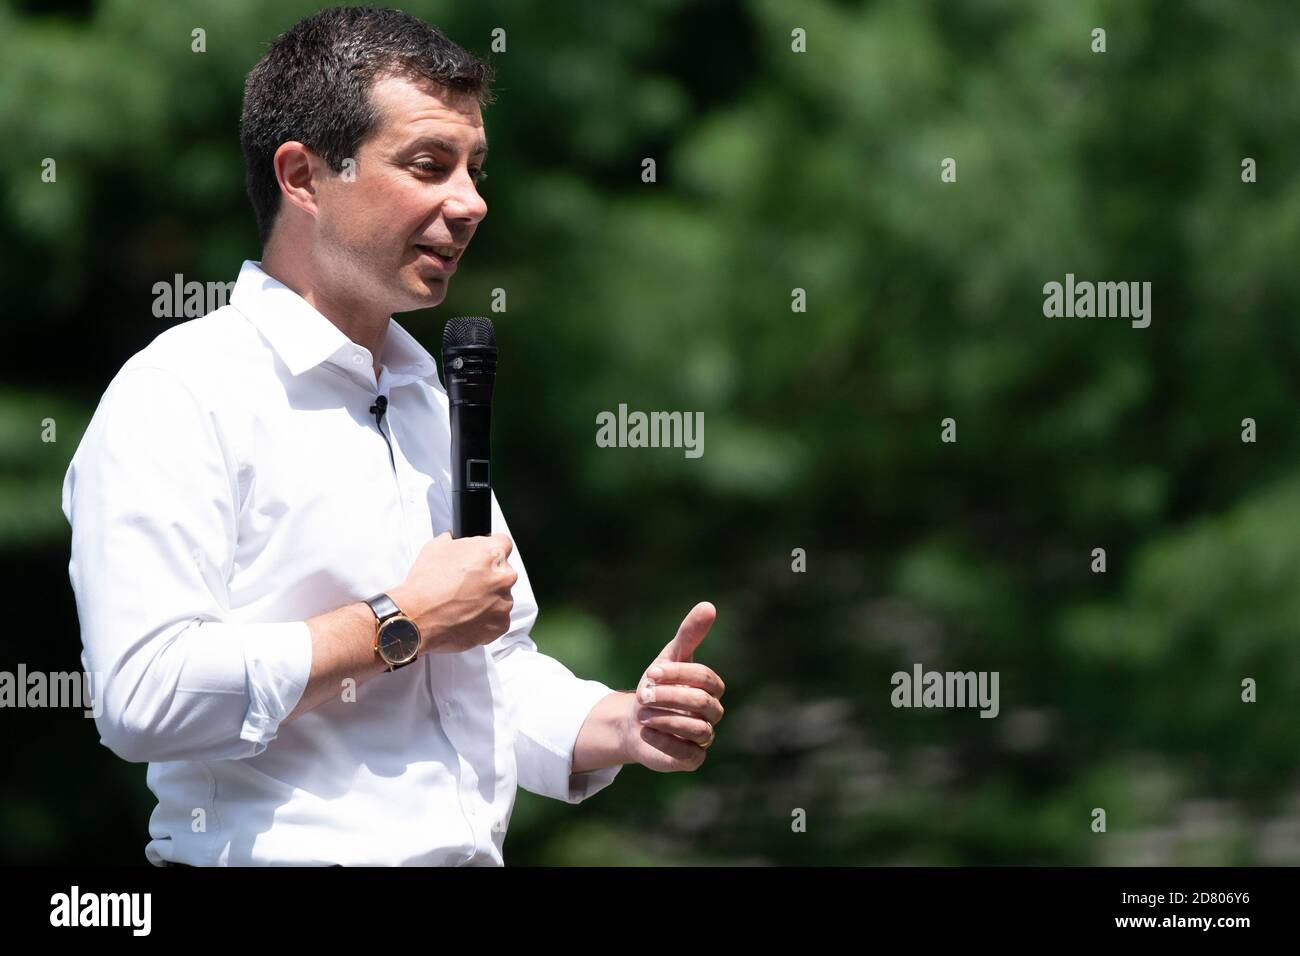 2020 Democratic Presidential hopeful, South Bend, Indiana Mayor, Pete Buttigieg speaks during a campaign event in Muscatine, Iowa on August 14, 2019. Buttigieg is campaigning in Iowa for the next two days discussing his plans to empower rural America. Credit: Alex Edelman/The Photo Access Stock Photo